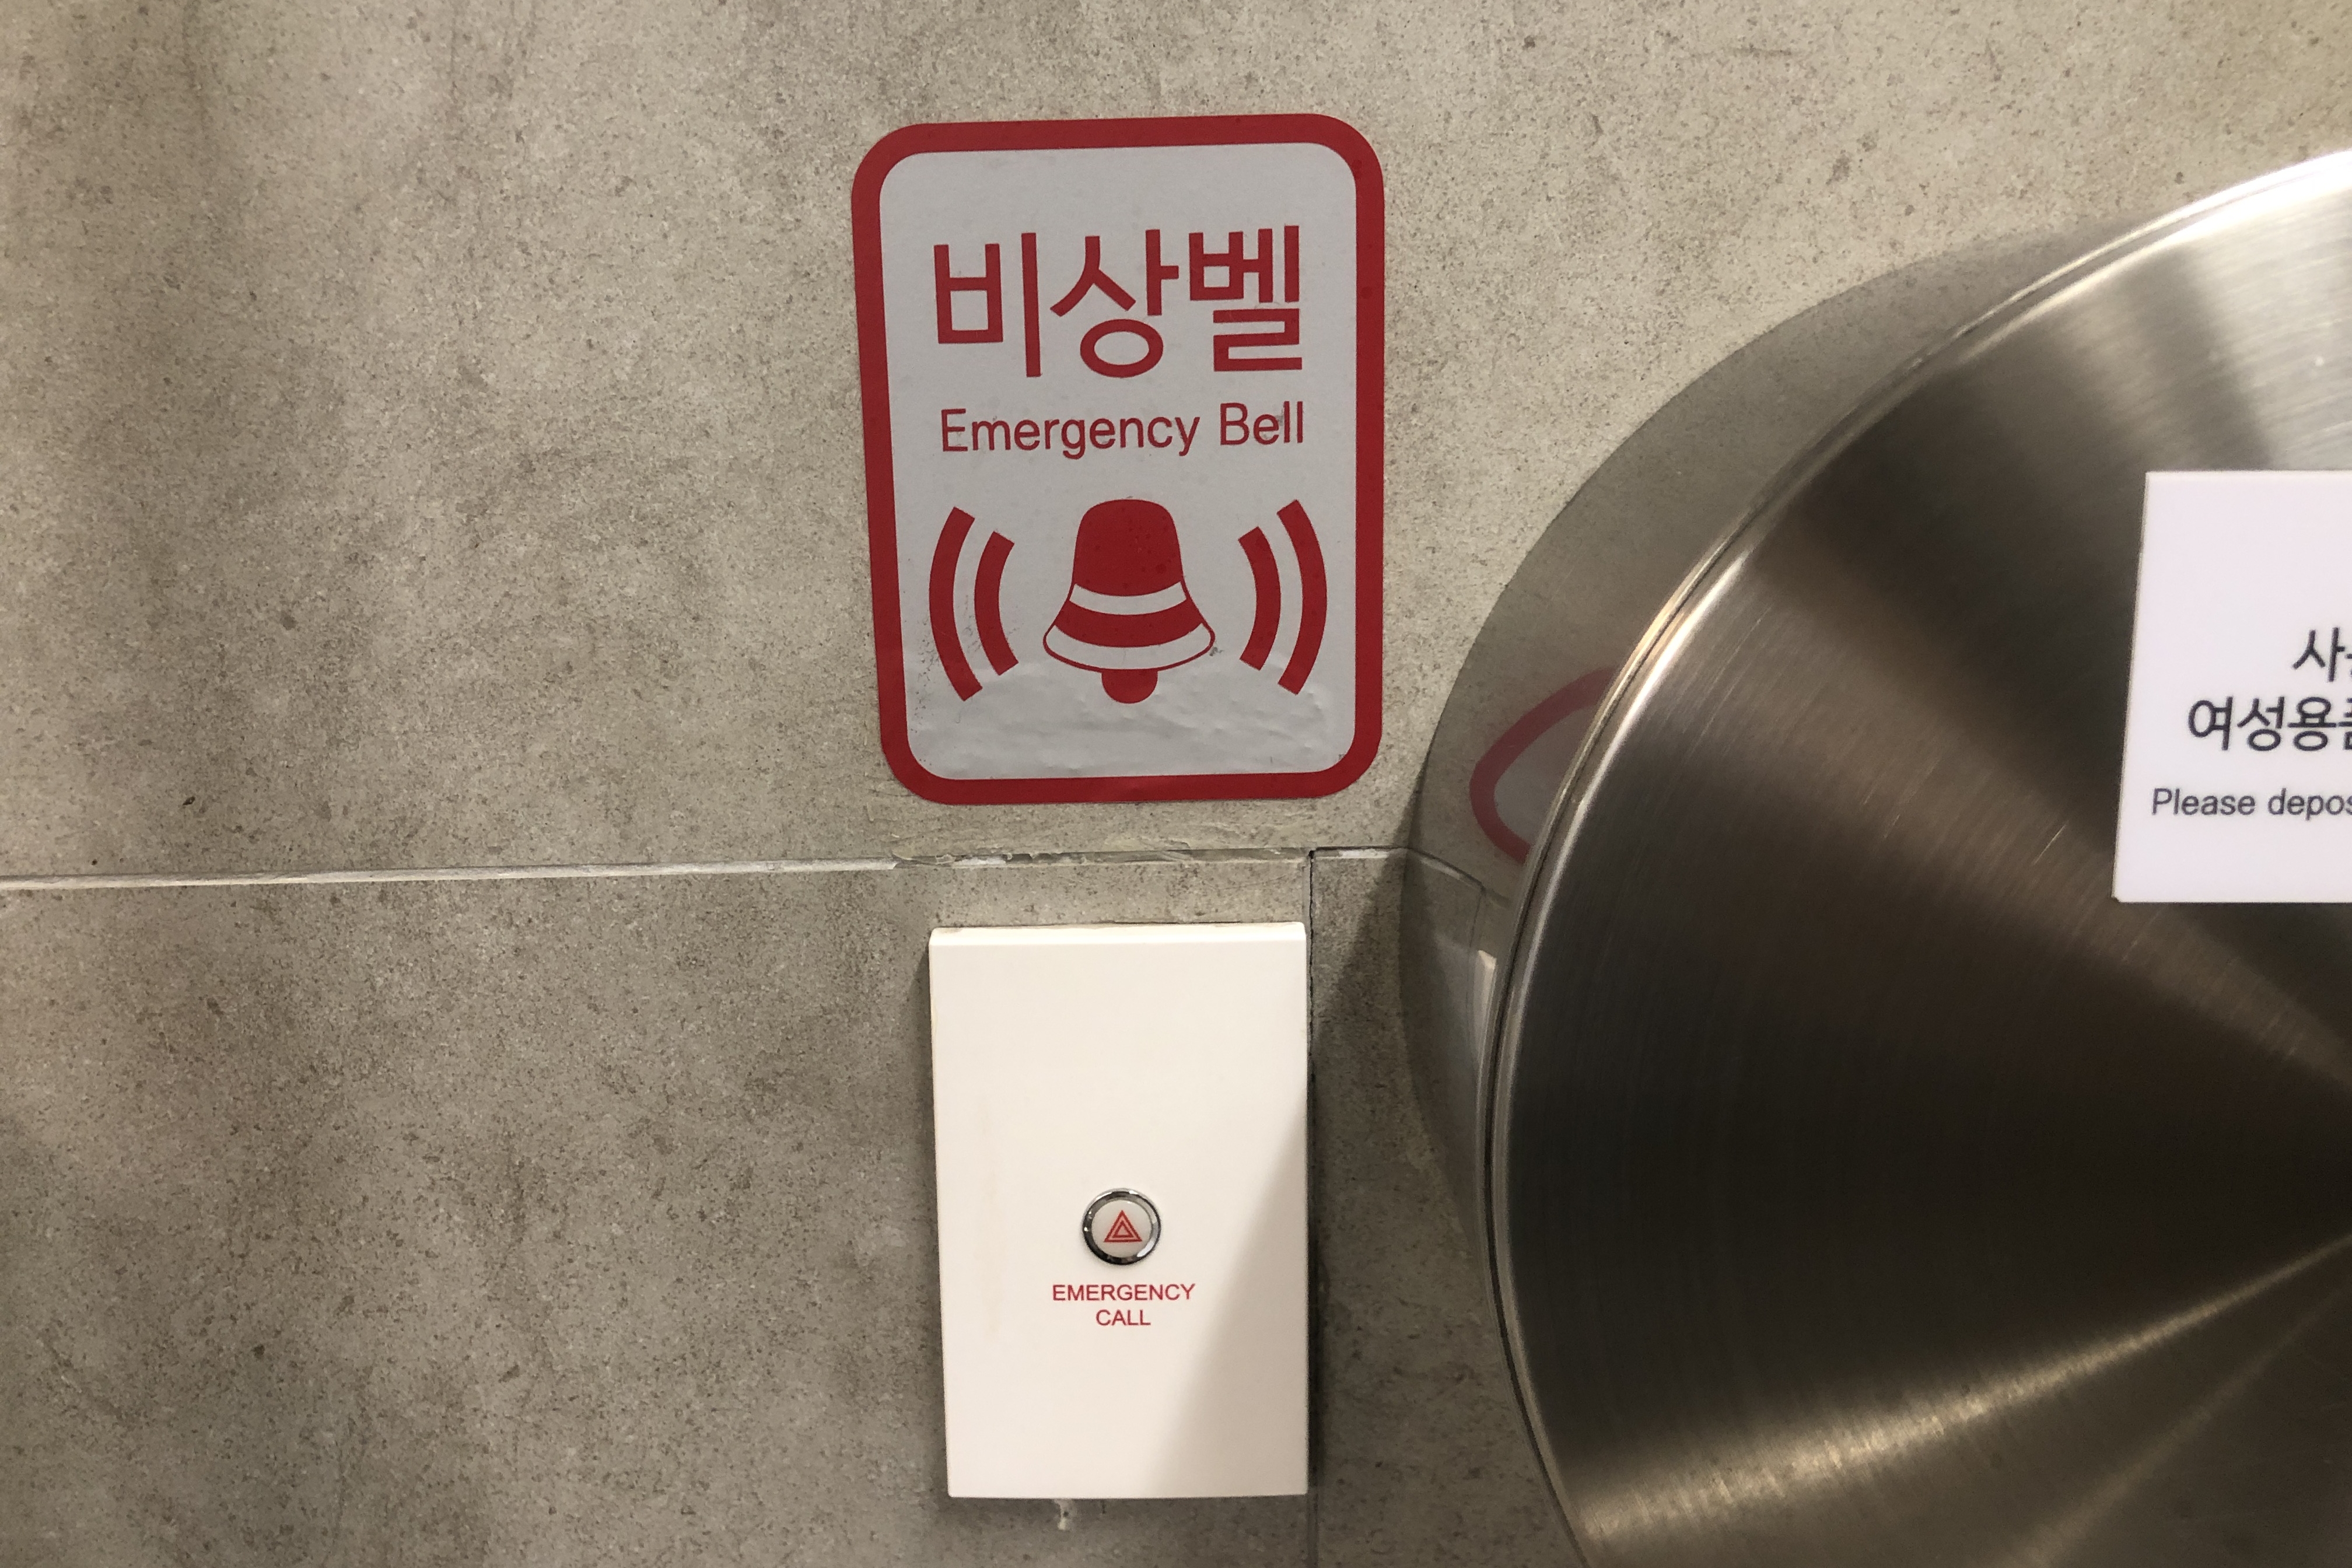 Restroom0 : An emergency bell in accessible restroom
